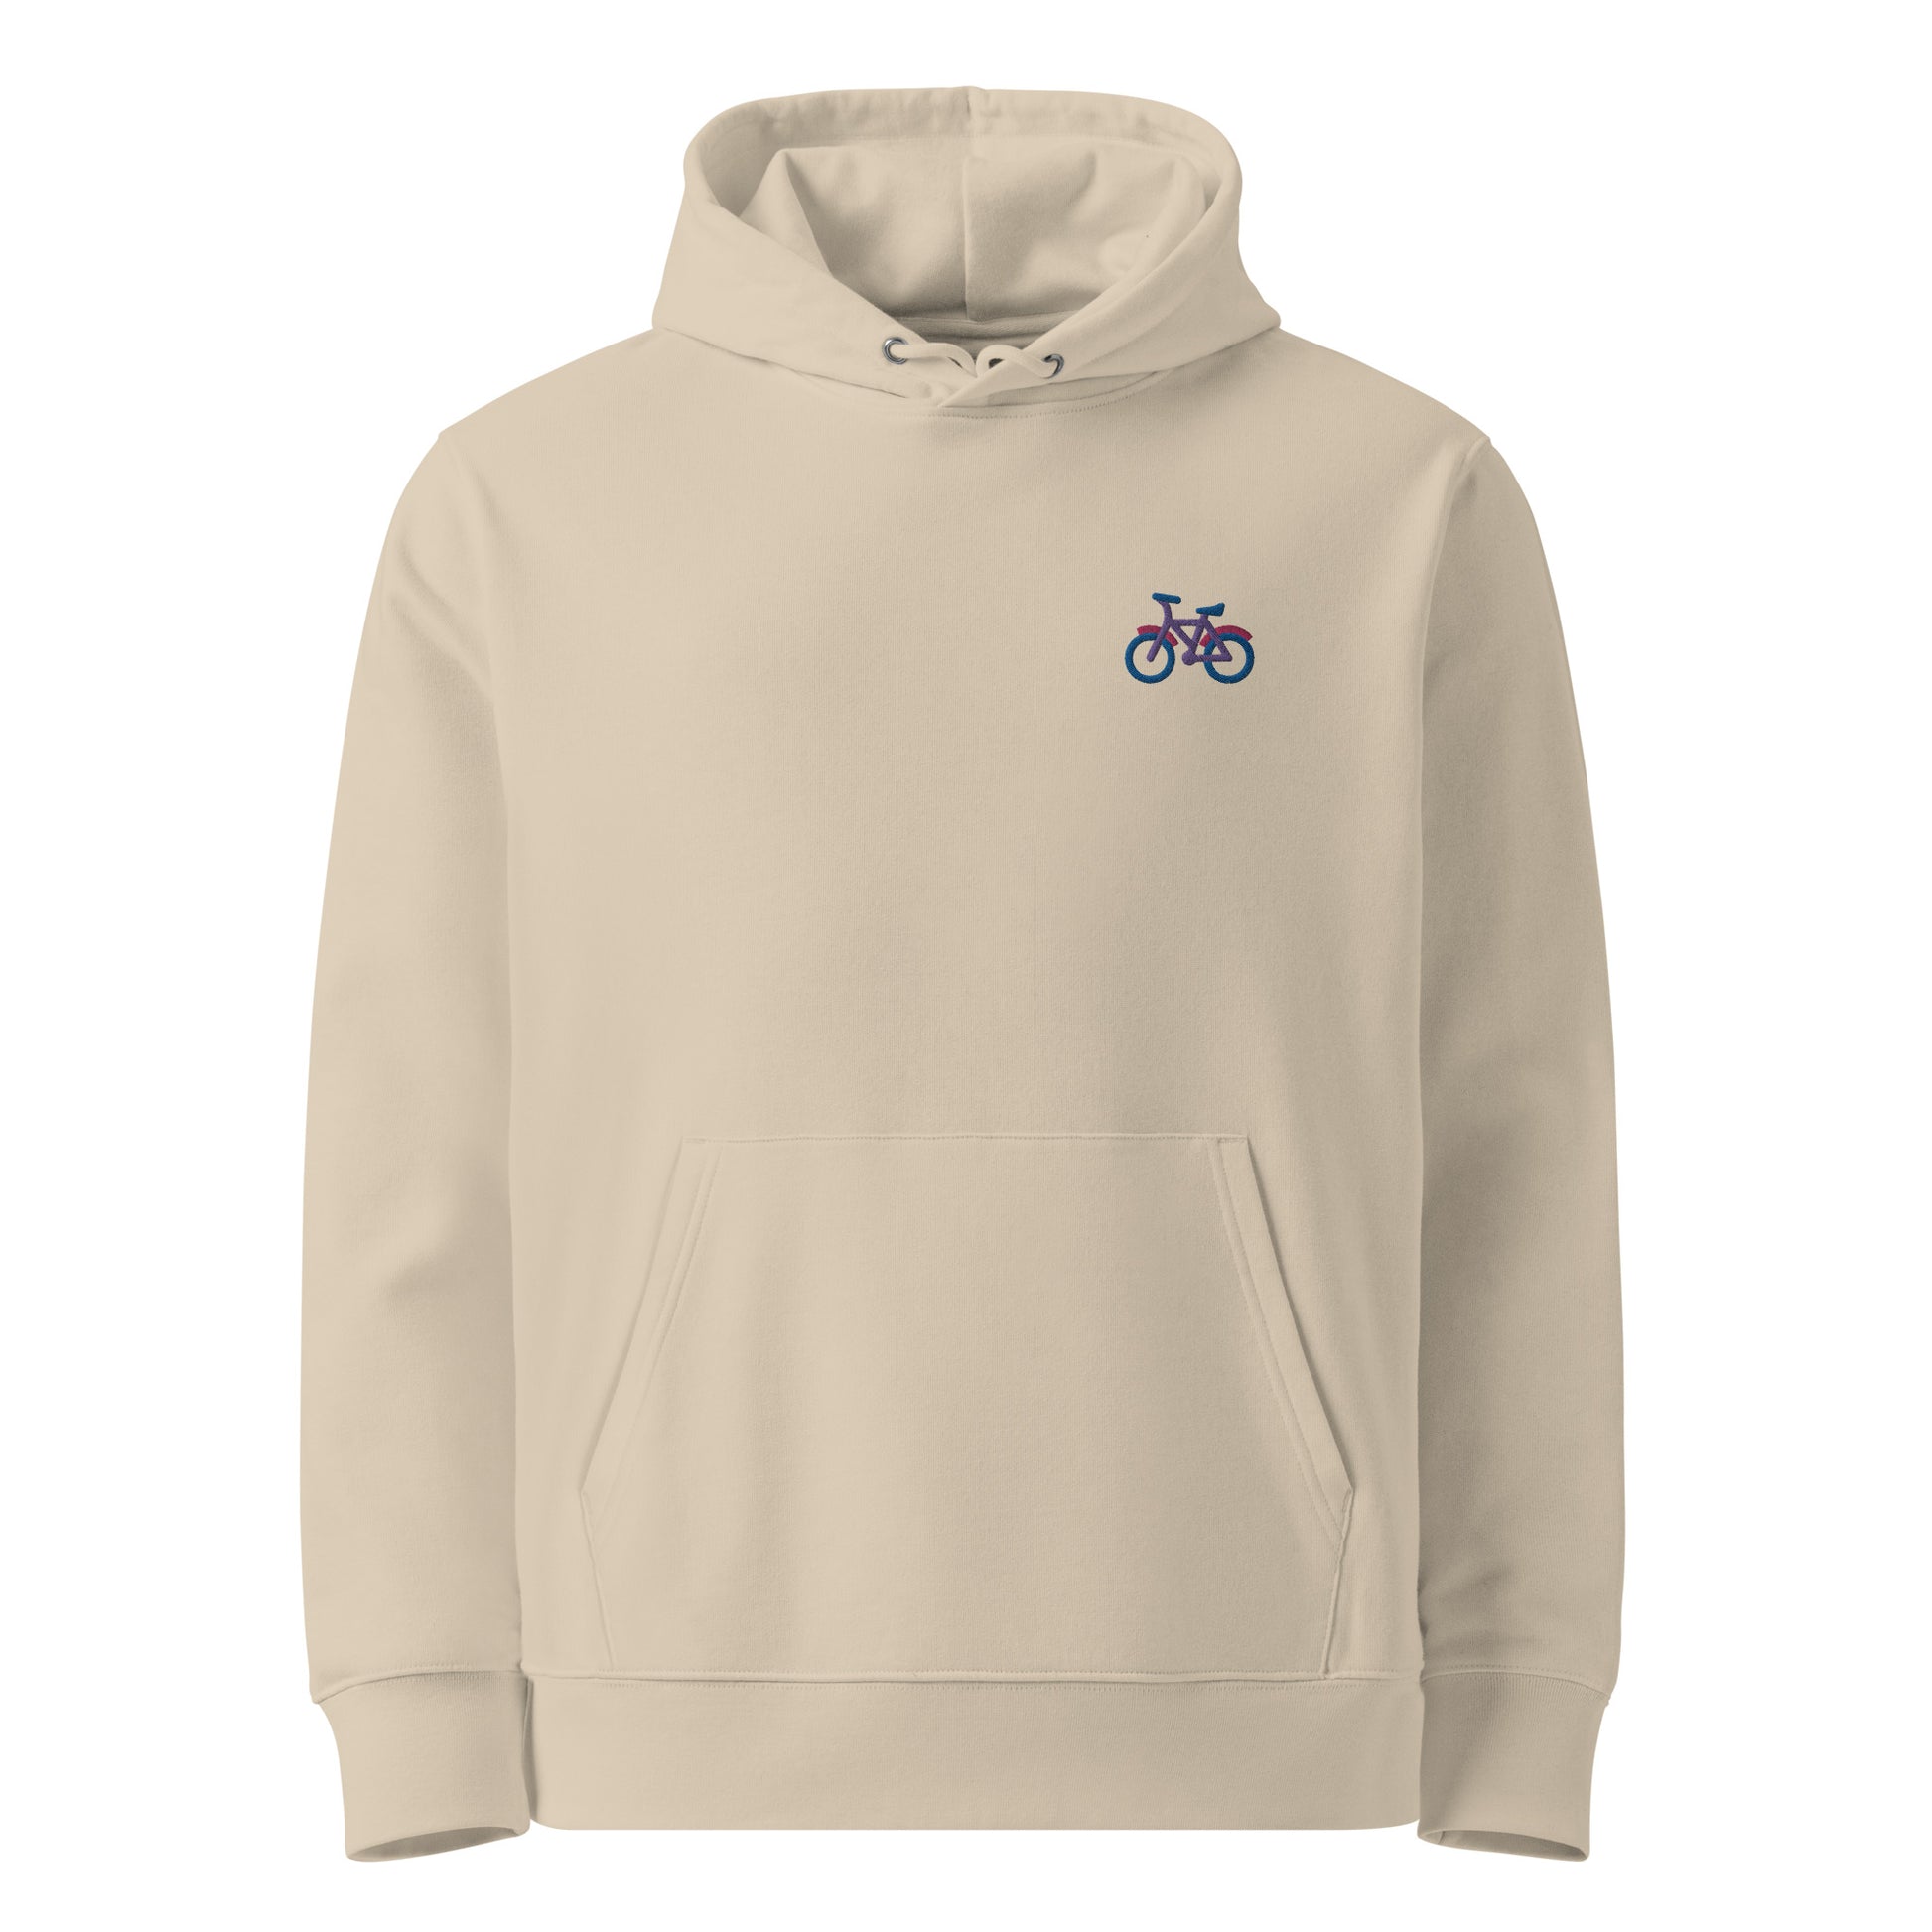 Unisex eco-friendly desert dust hoodie featuring on the upper left chest; a subtle embroidered bicycle in bisexual colors, adding a touch of lgbtq to your outfit by putting the bi in bicycle. sizes: small, medium, large, extra large, double extra large.